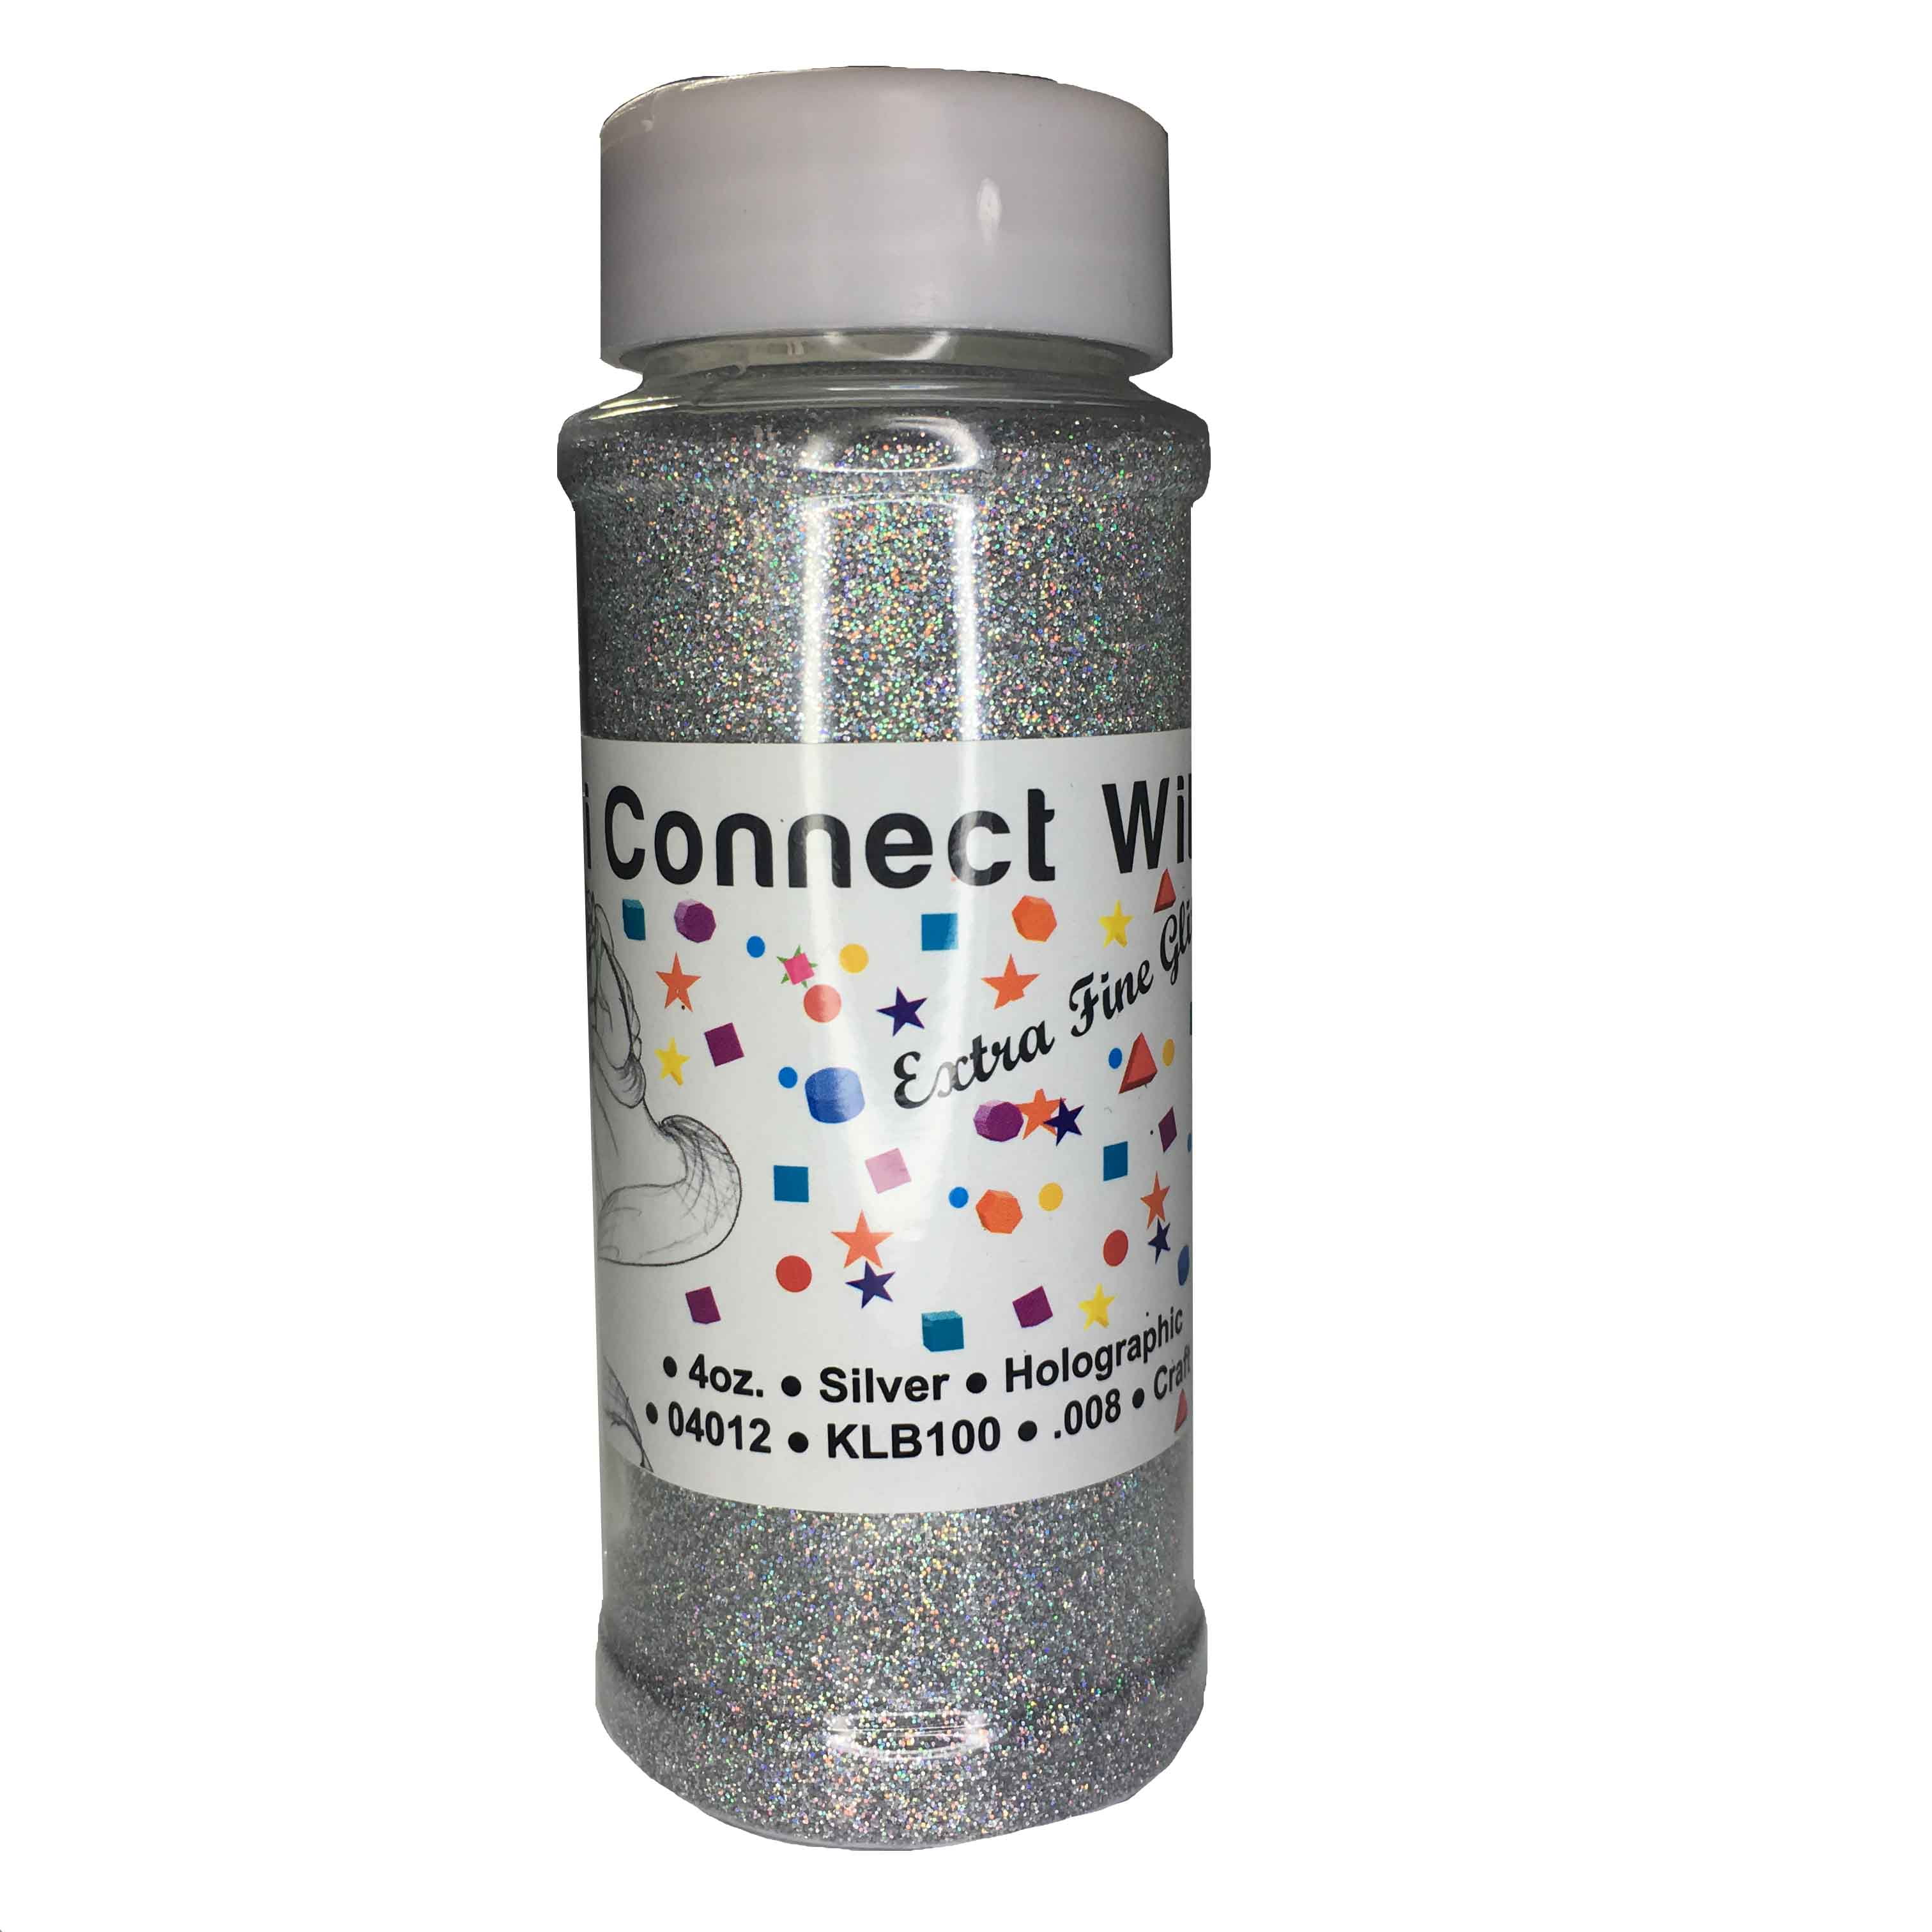 Bubble Gum extra fine 1/128 polyester glitter comes in a 2 ounce shaker bottle